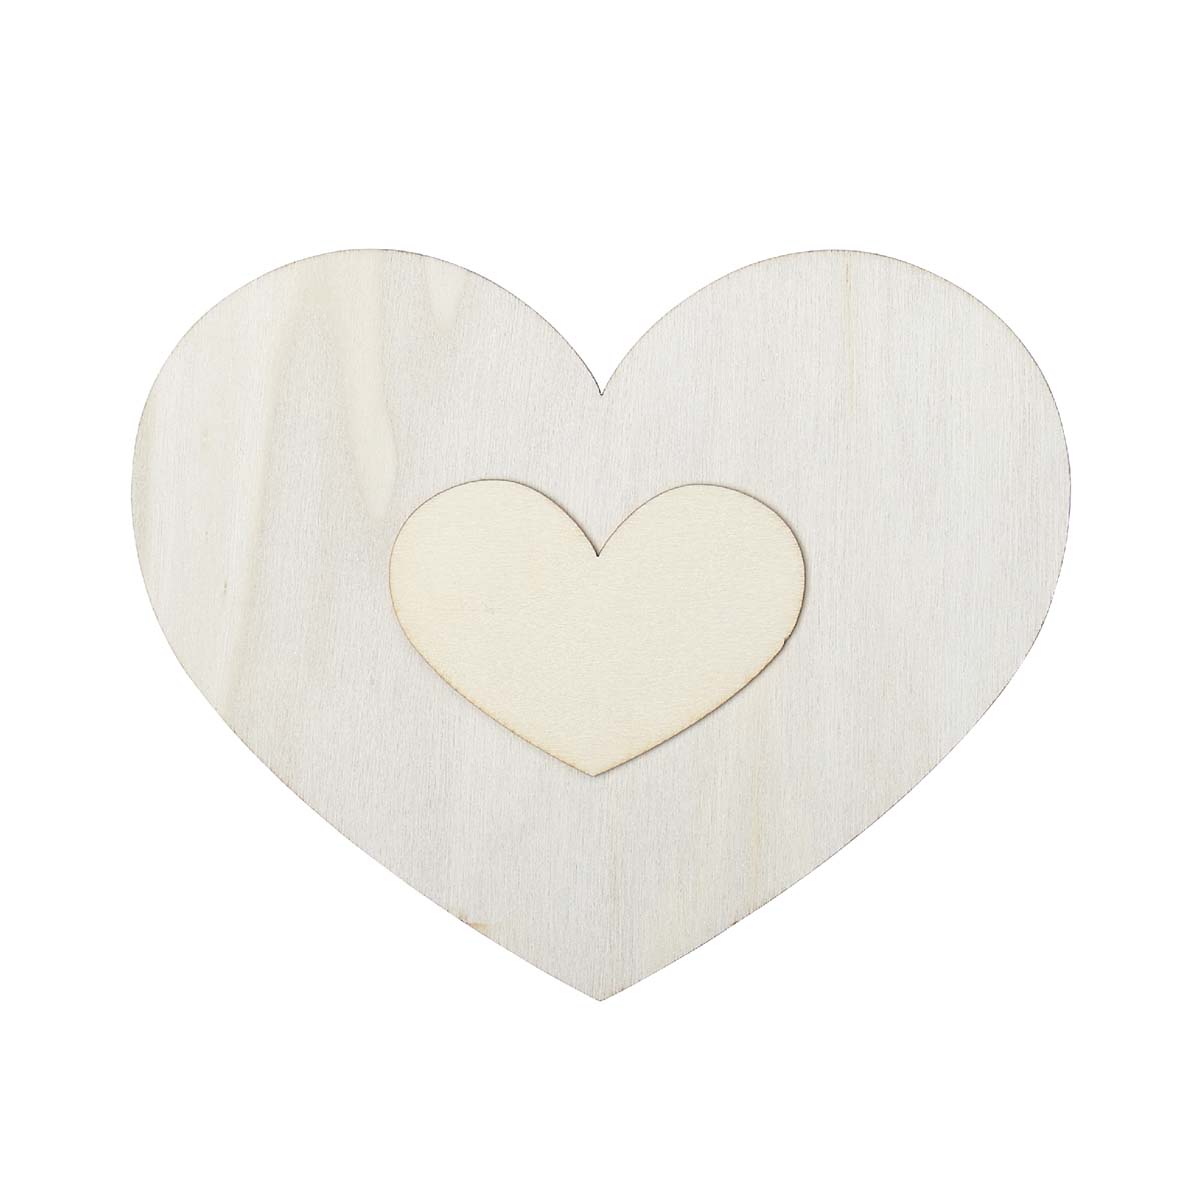 Plaid ® Wood Surfaces - Unfinished Layered Shapes - Heart - 63485